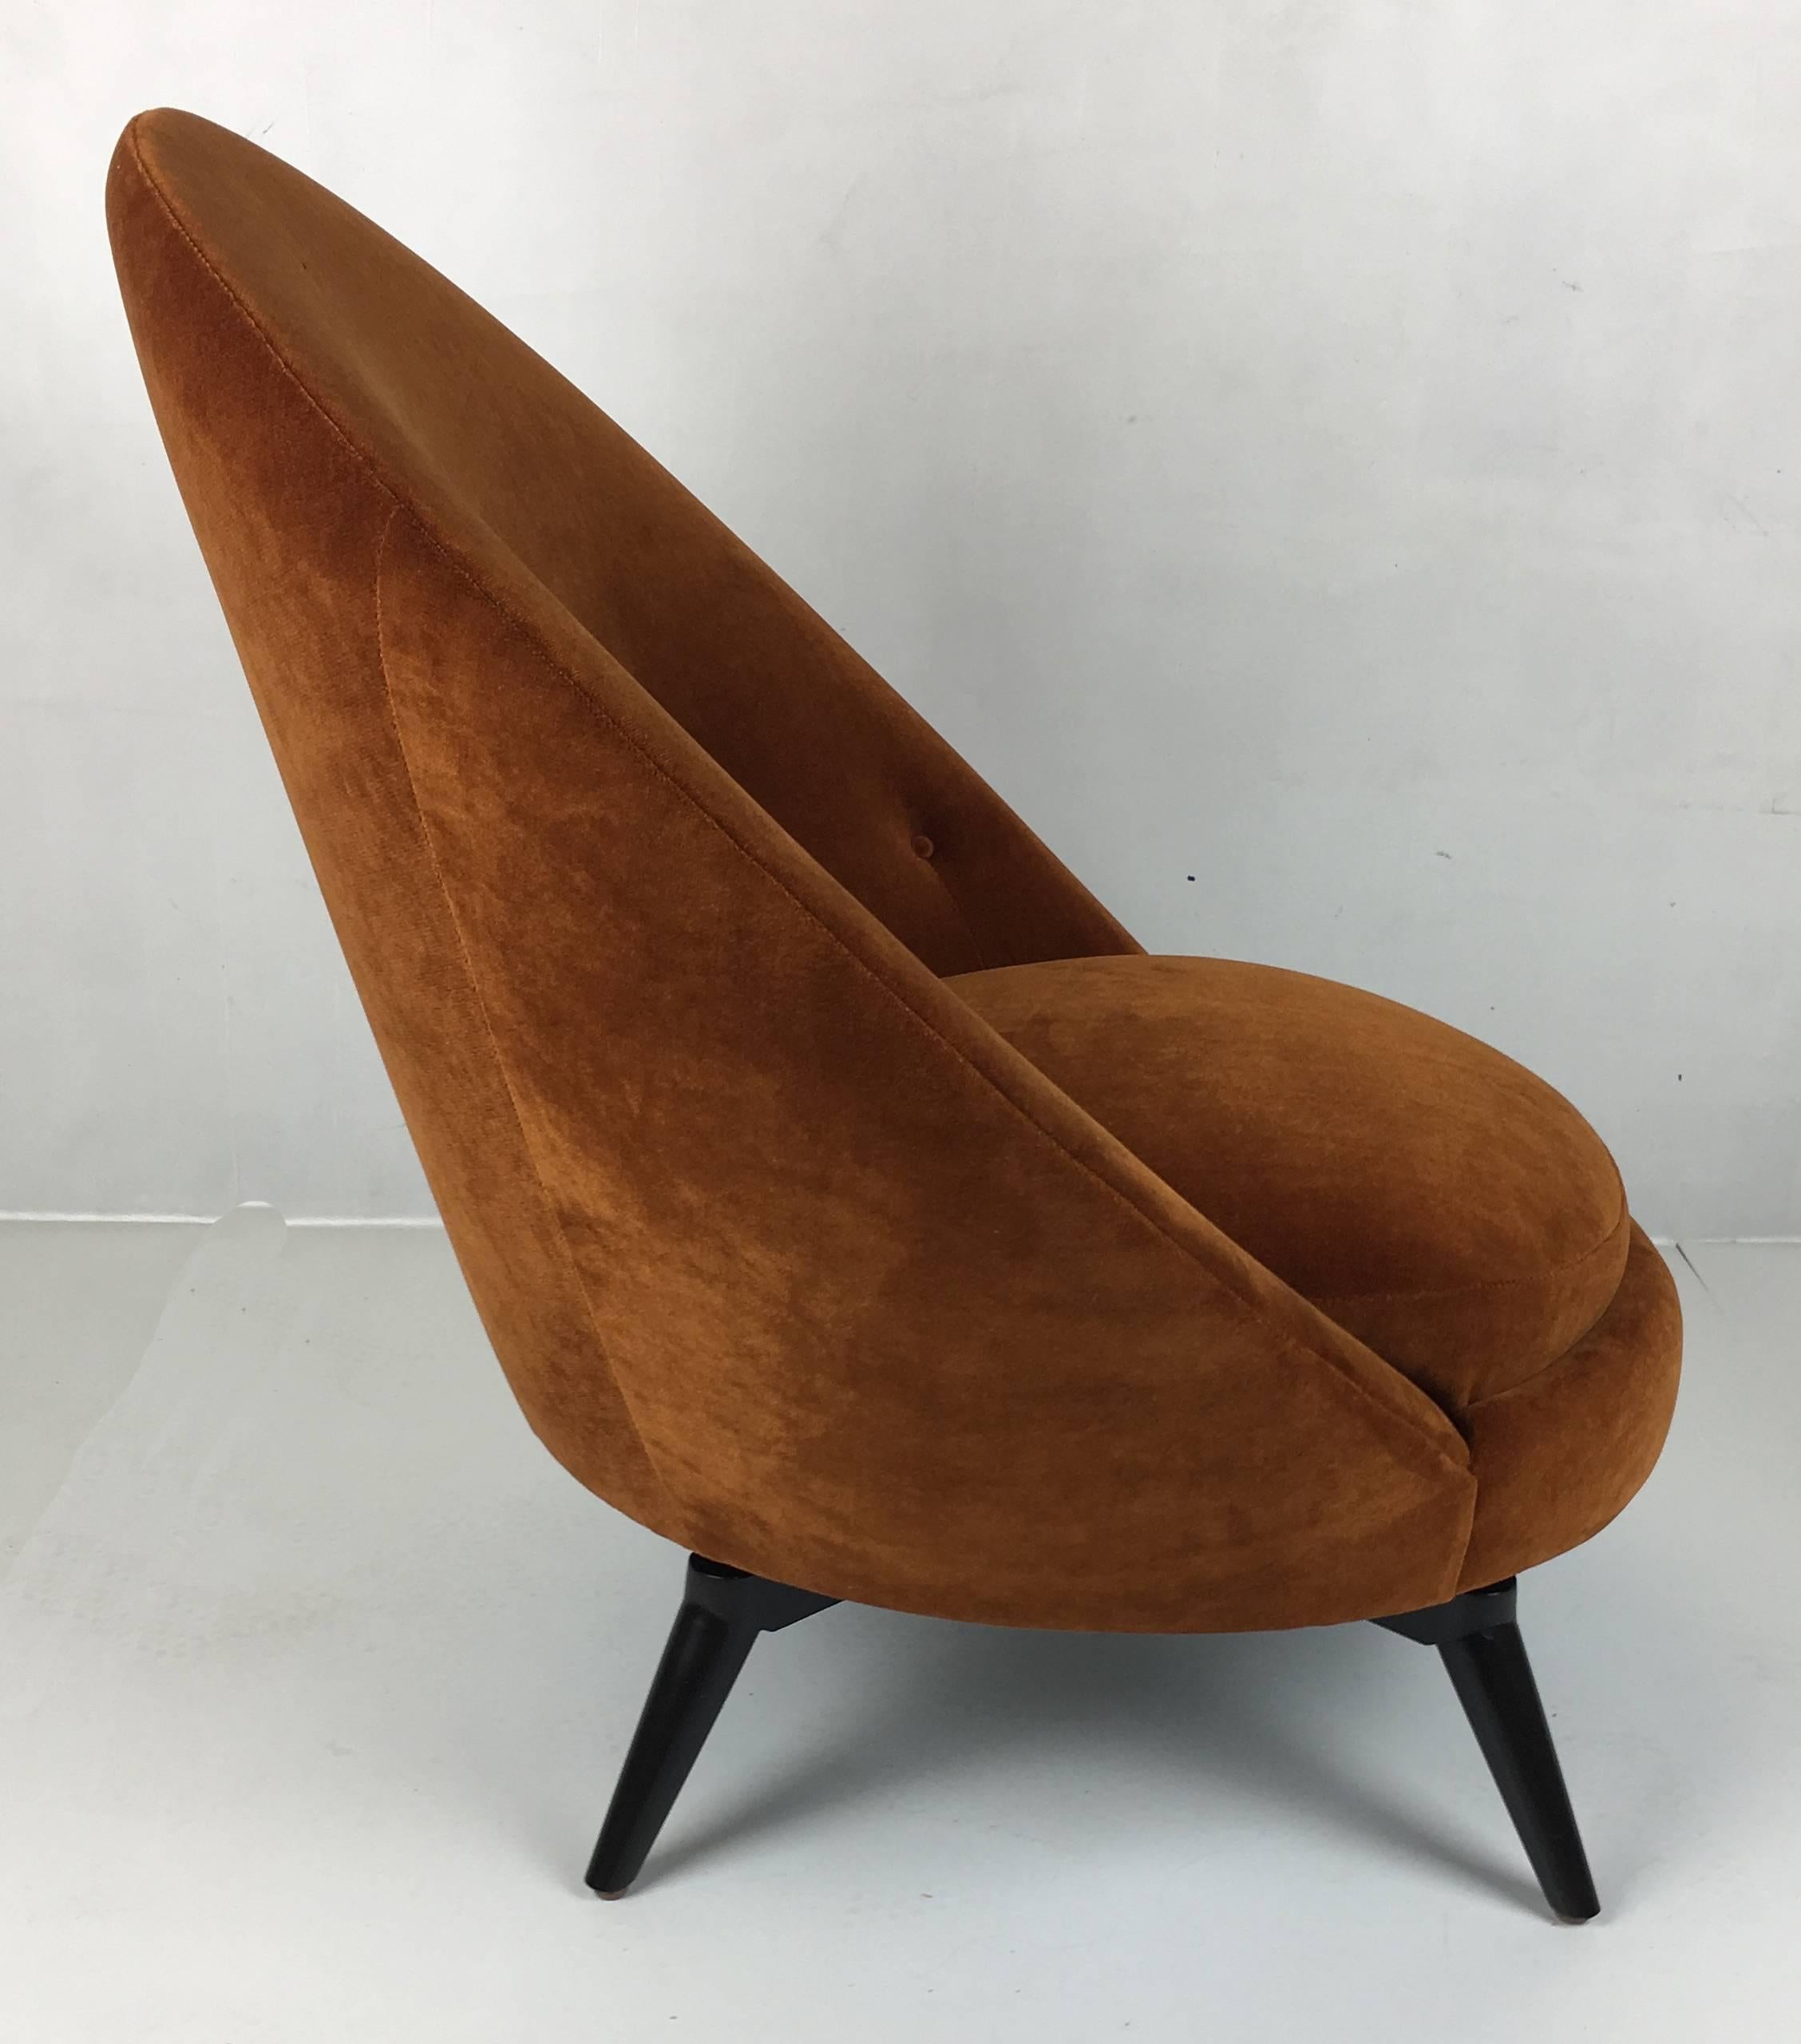 Swivel egg chairs in the style of Jean Royère. This sophisticated chair has been freshly upholstered in heavy-weight, backed burnt gold velvet but we also offer them in COM. These super stylish and versatile chairs are as comfortable as they look